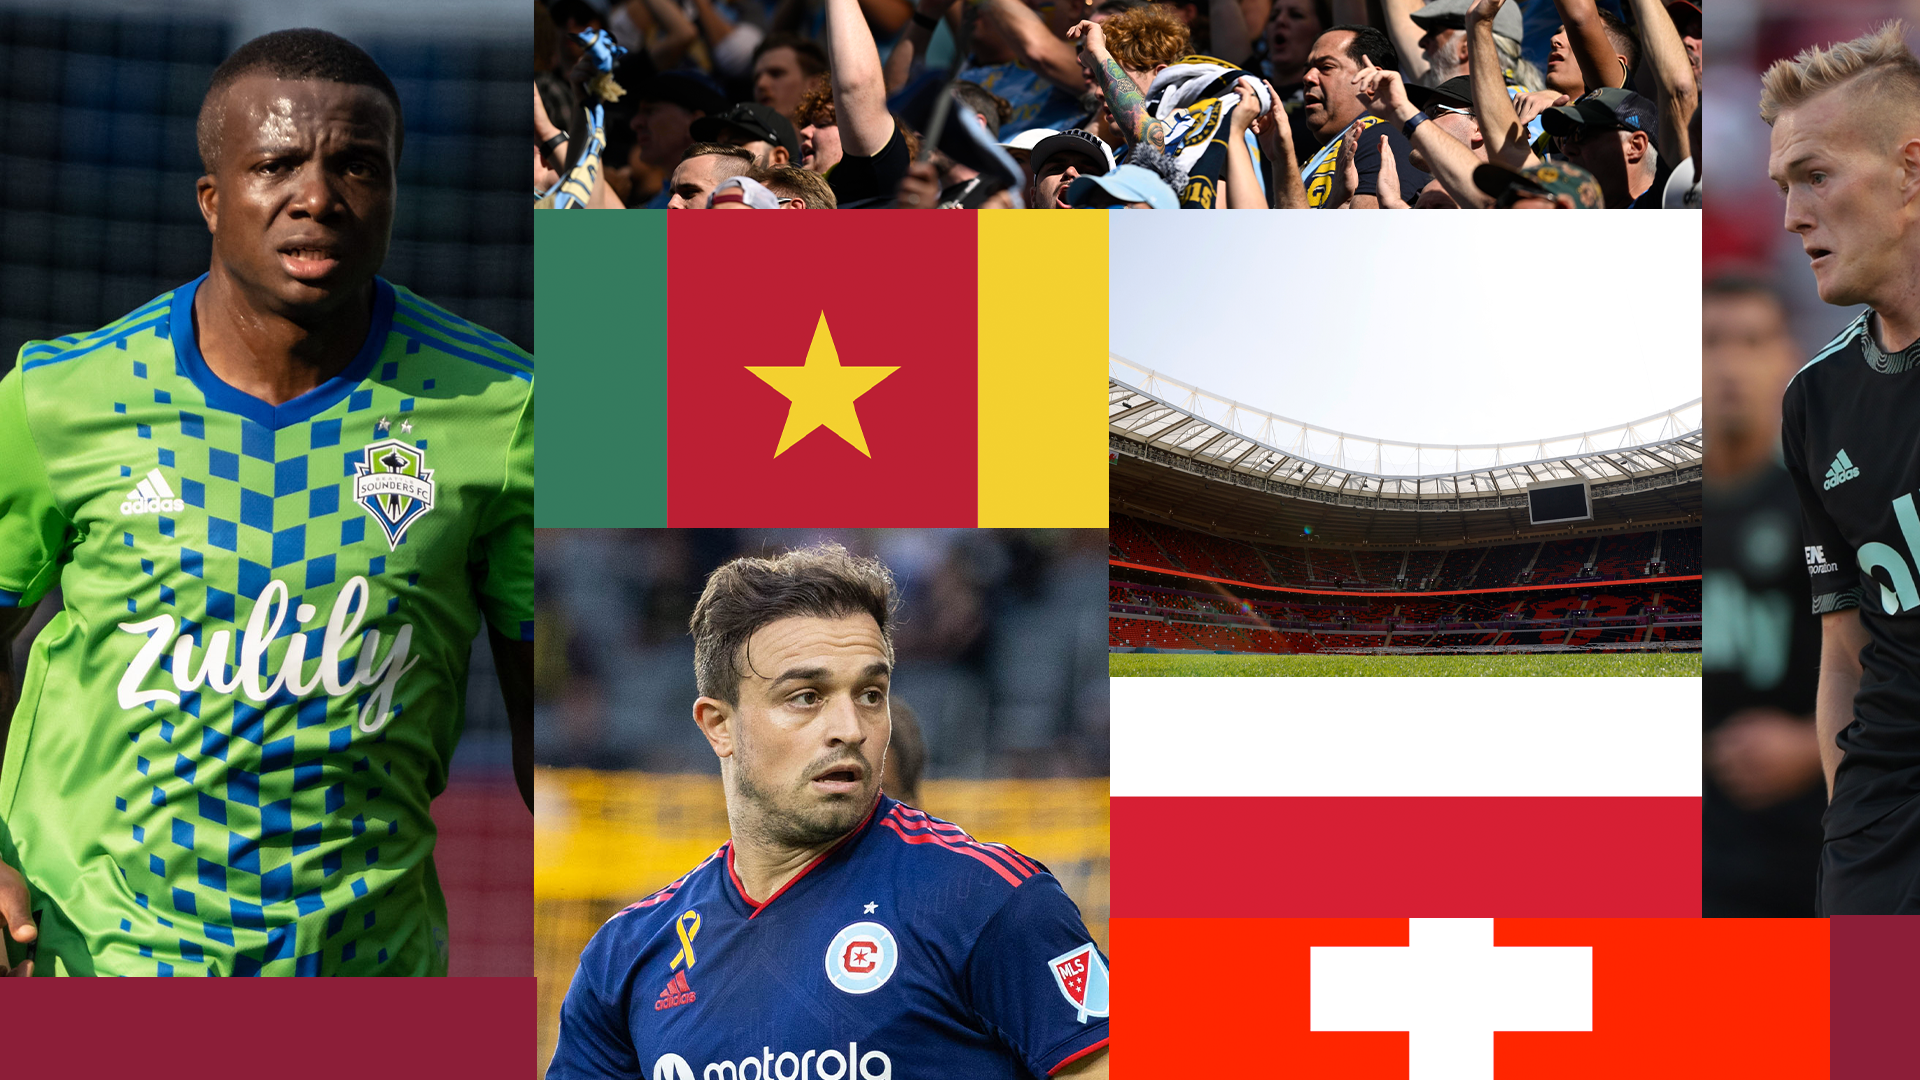 MLS fan guide: What should you root for in the World Cup?